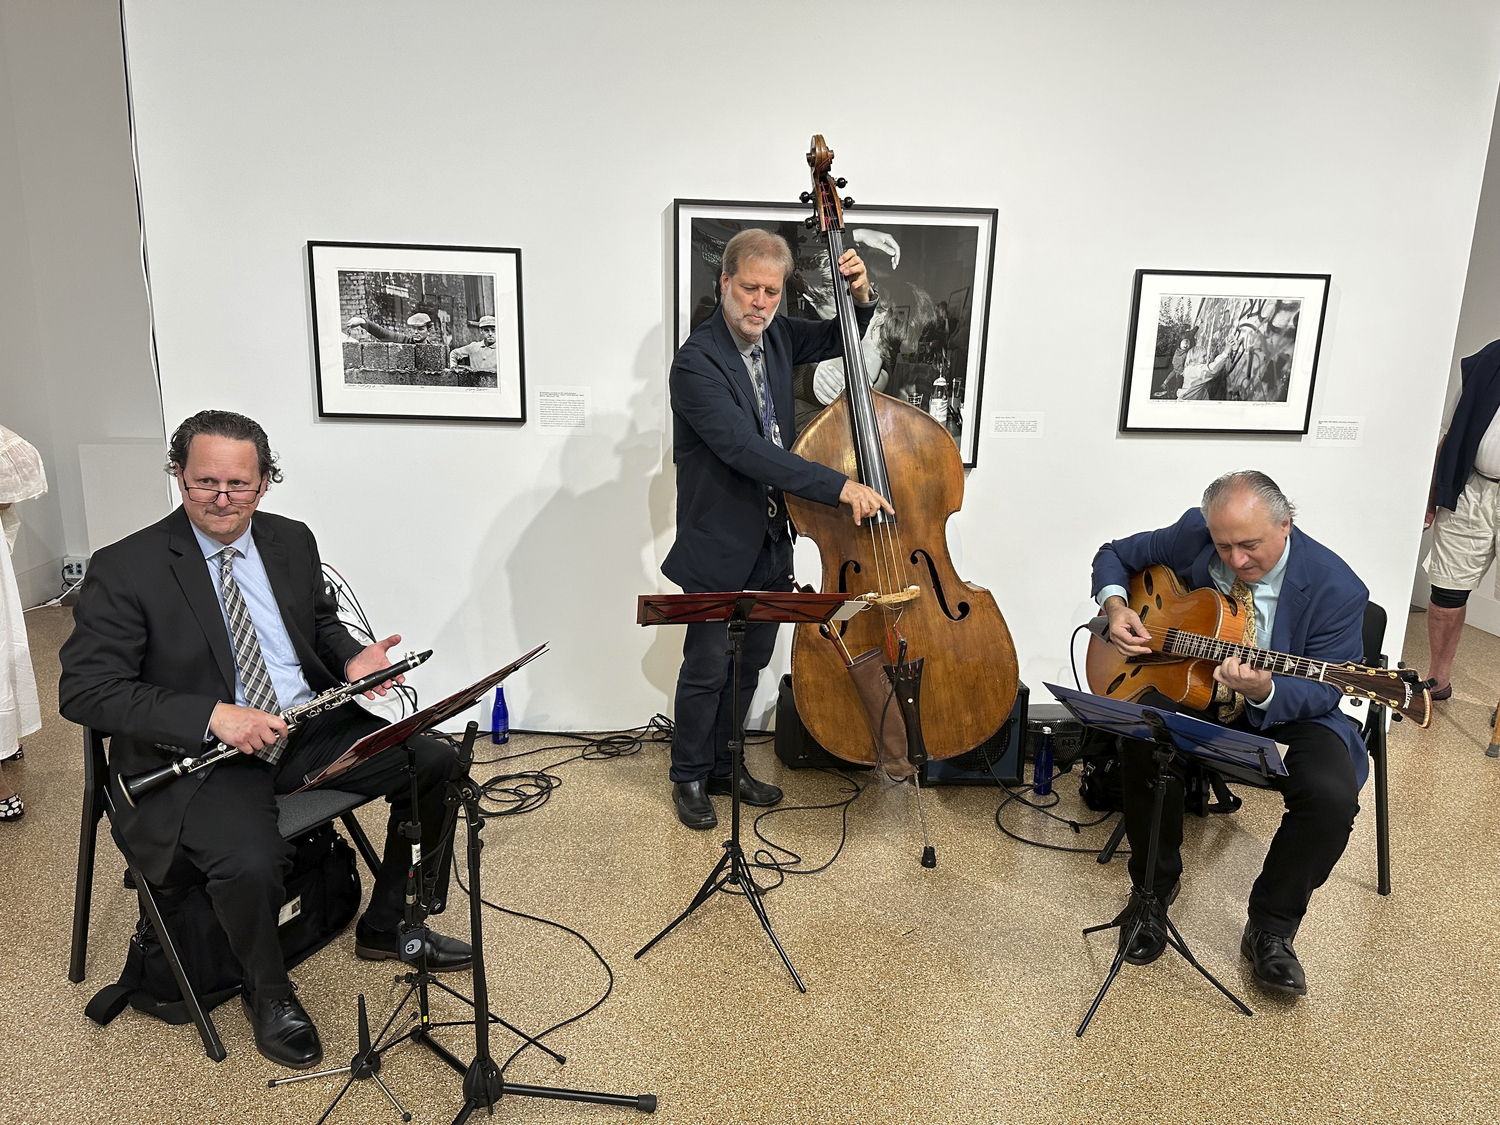 The Steve Salerno Trio entertains the guests.